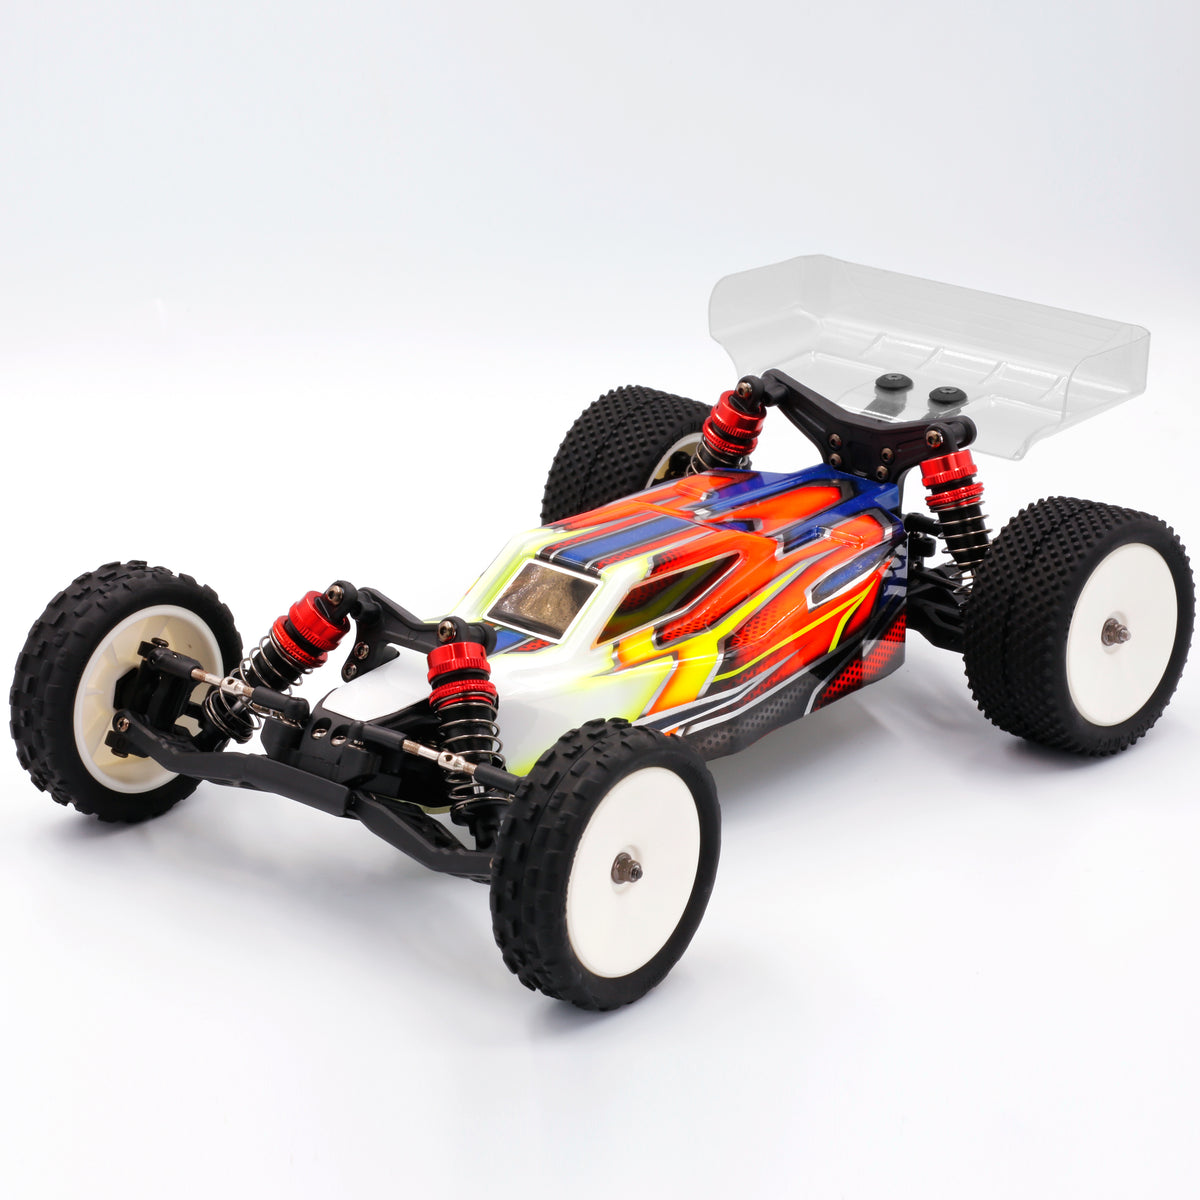 BHC-1 1/14 2WD Buggy - Ready to Run (Free Shipping) – LC 